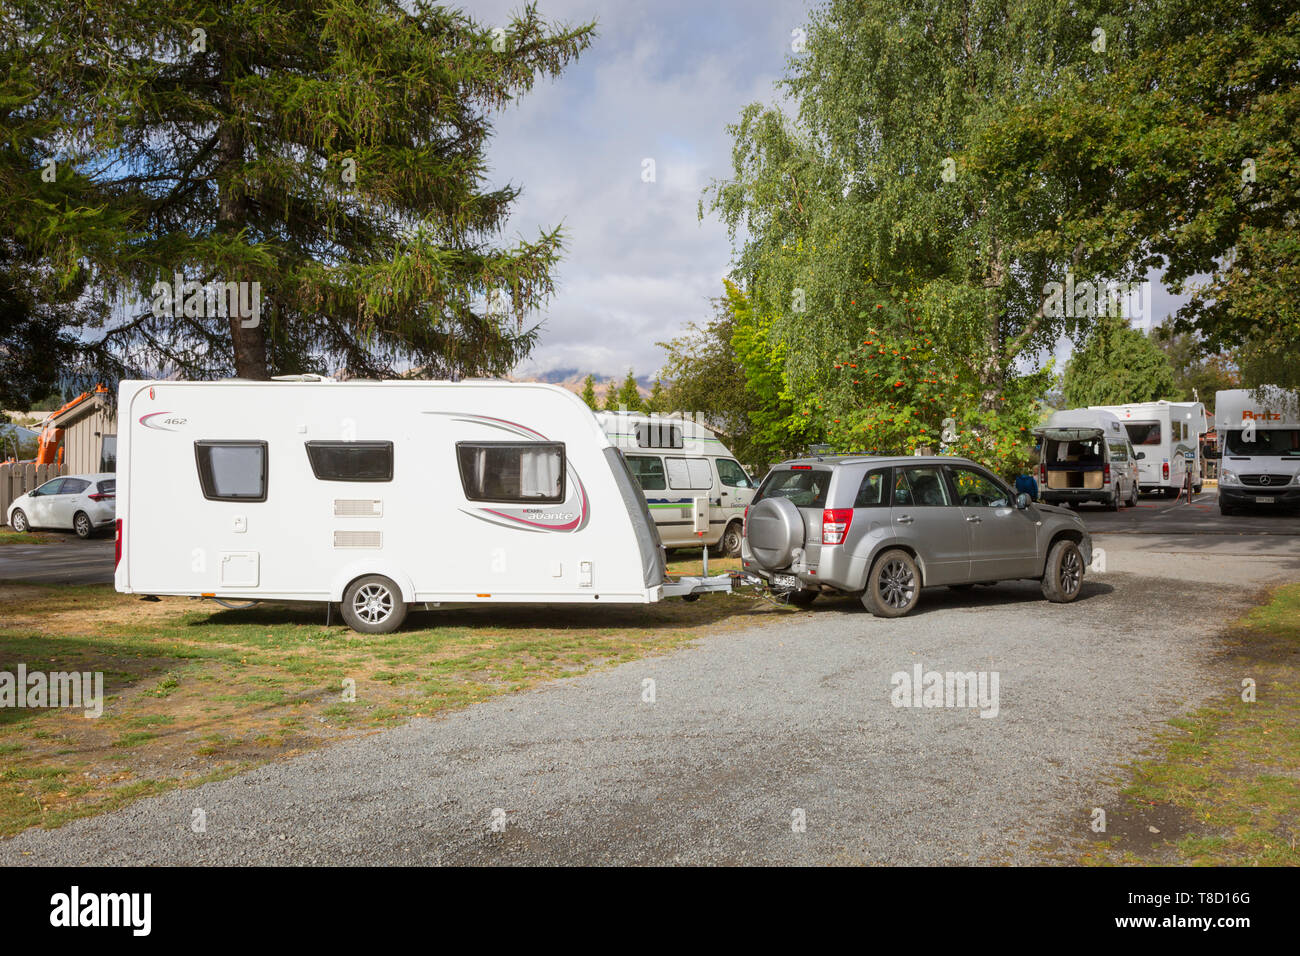 Car towing a caravan on a camping and caravanning site, New Zealand Stock Photo